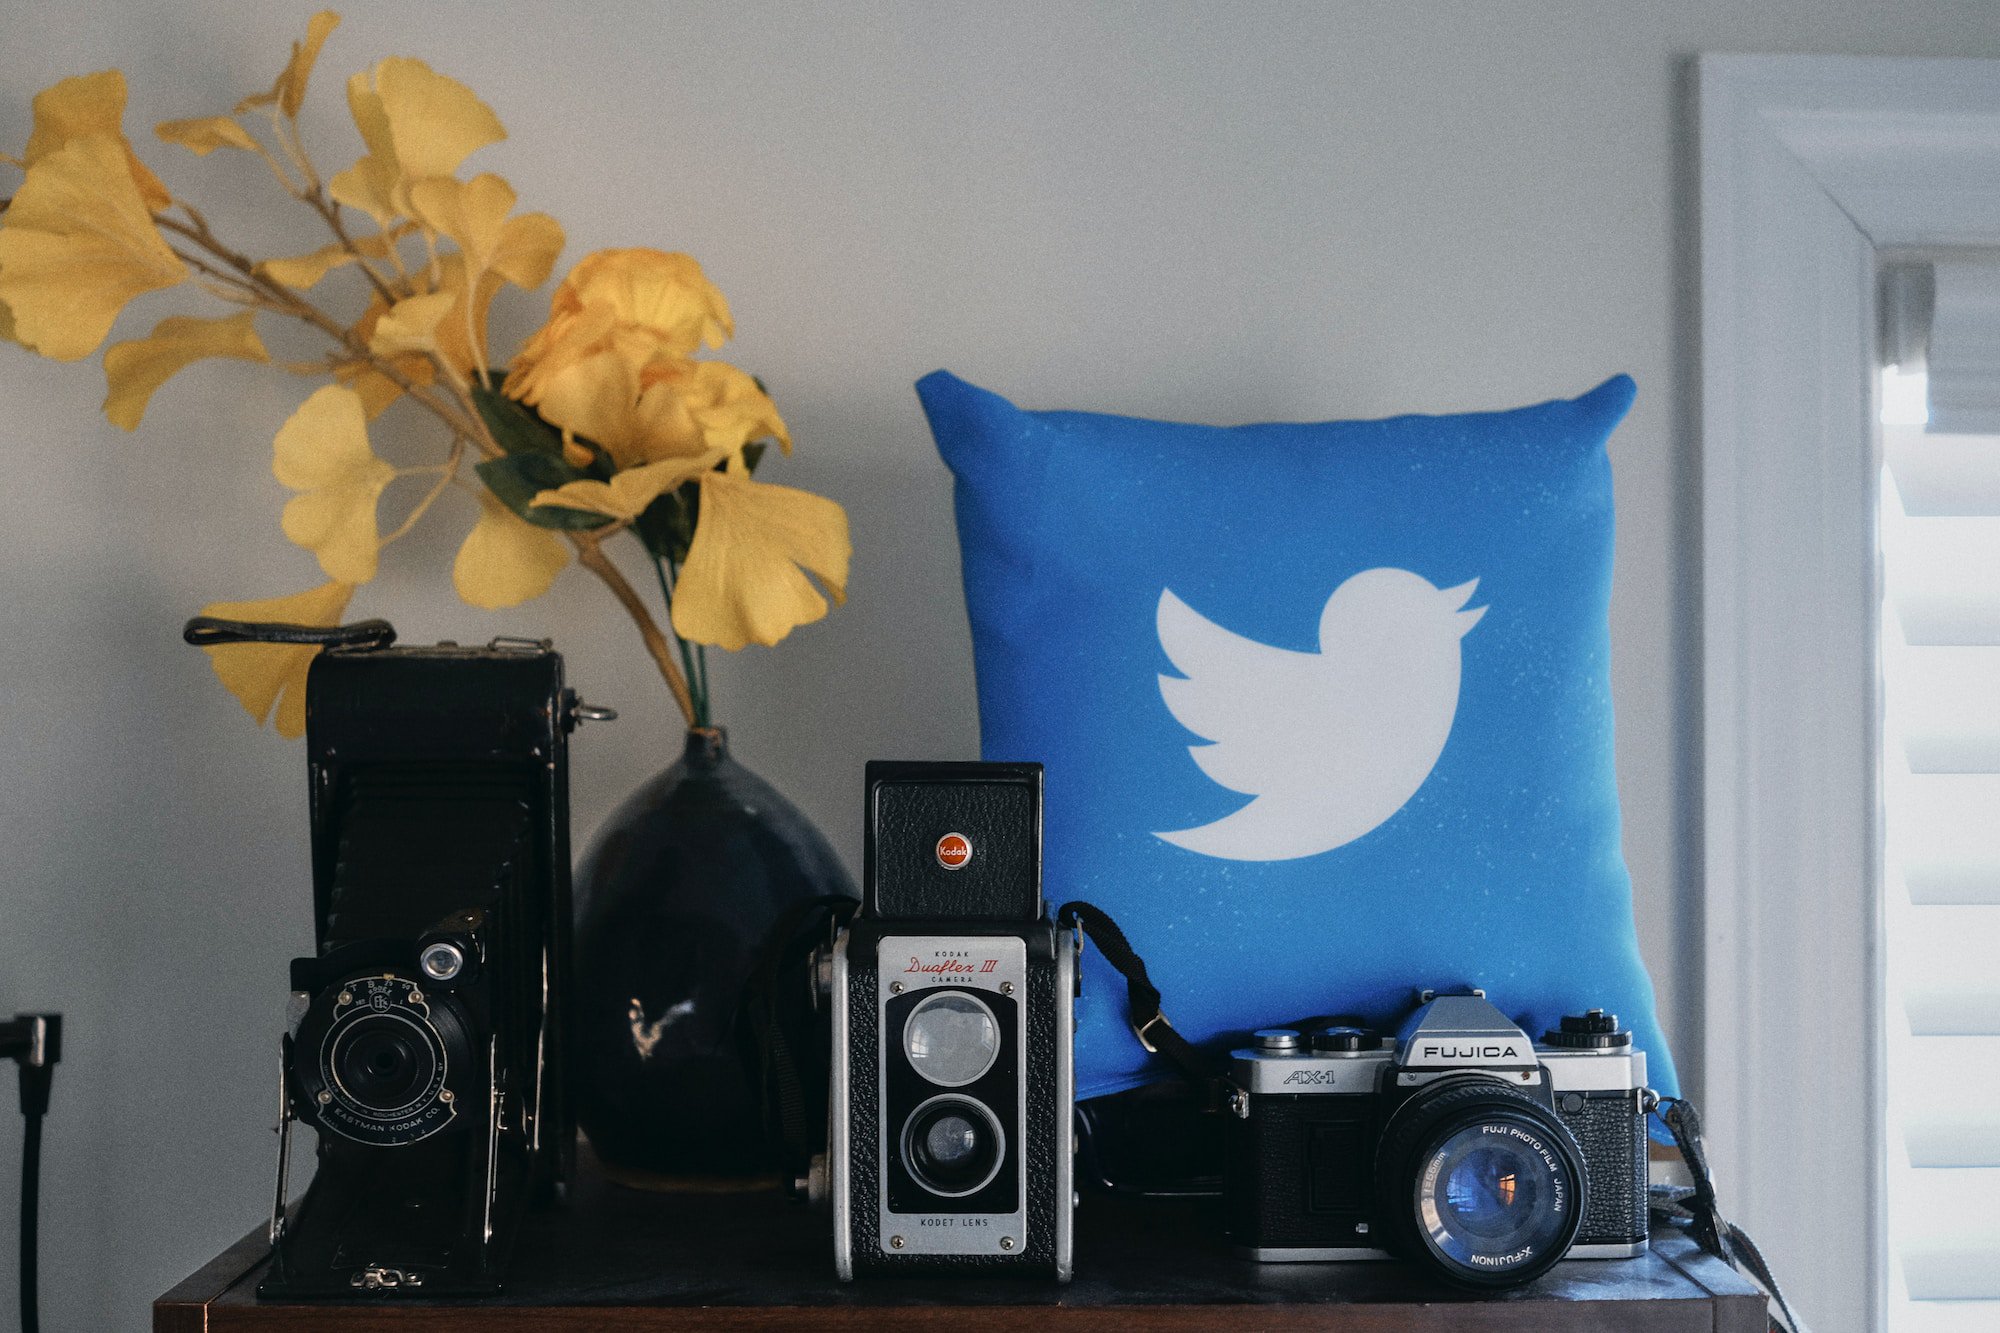 Mastering Twitter Trends: 5 Proven Ways to Keep Up with the Latest Buzz